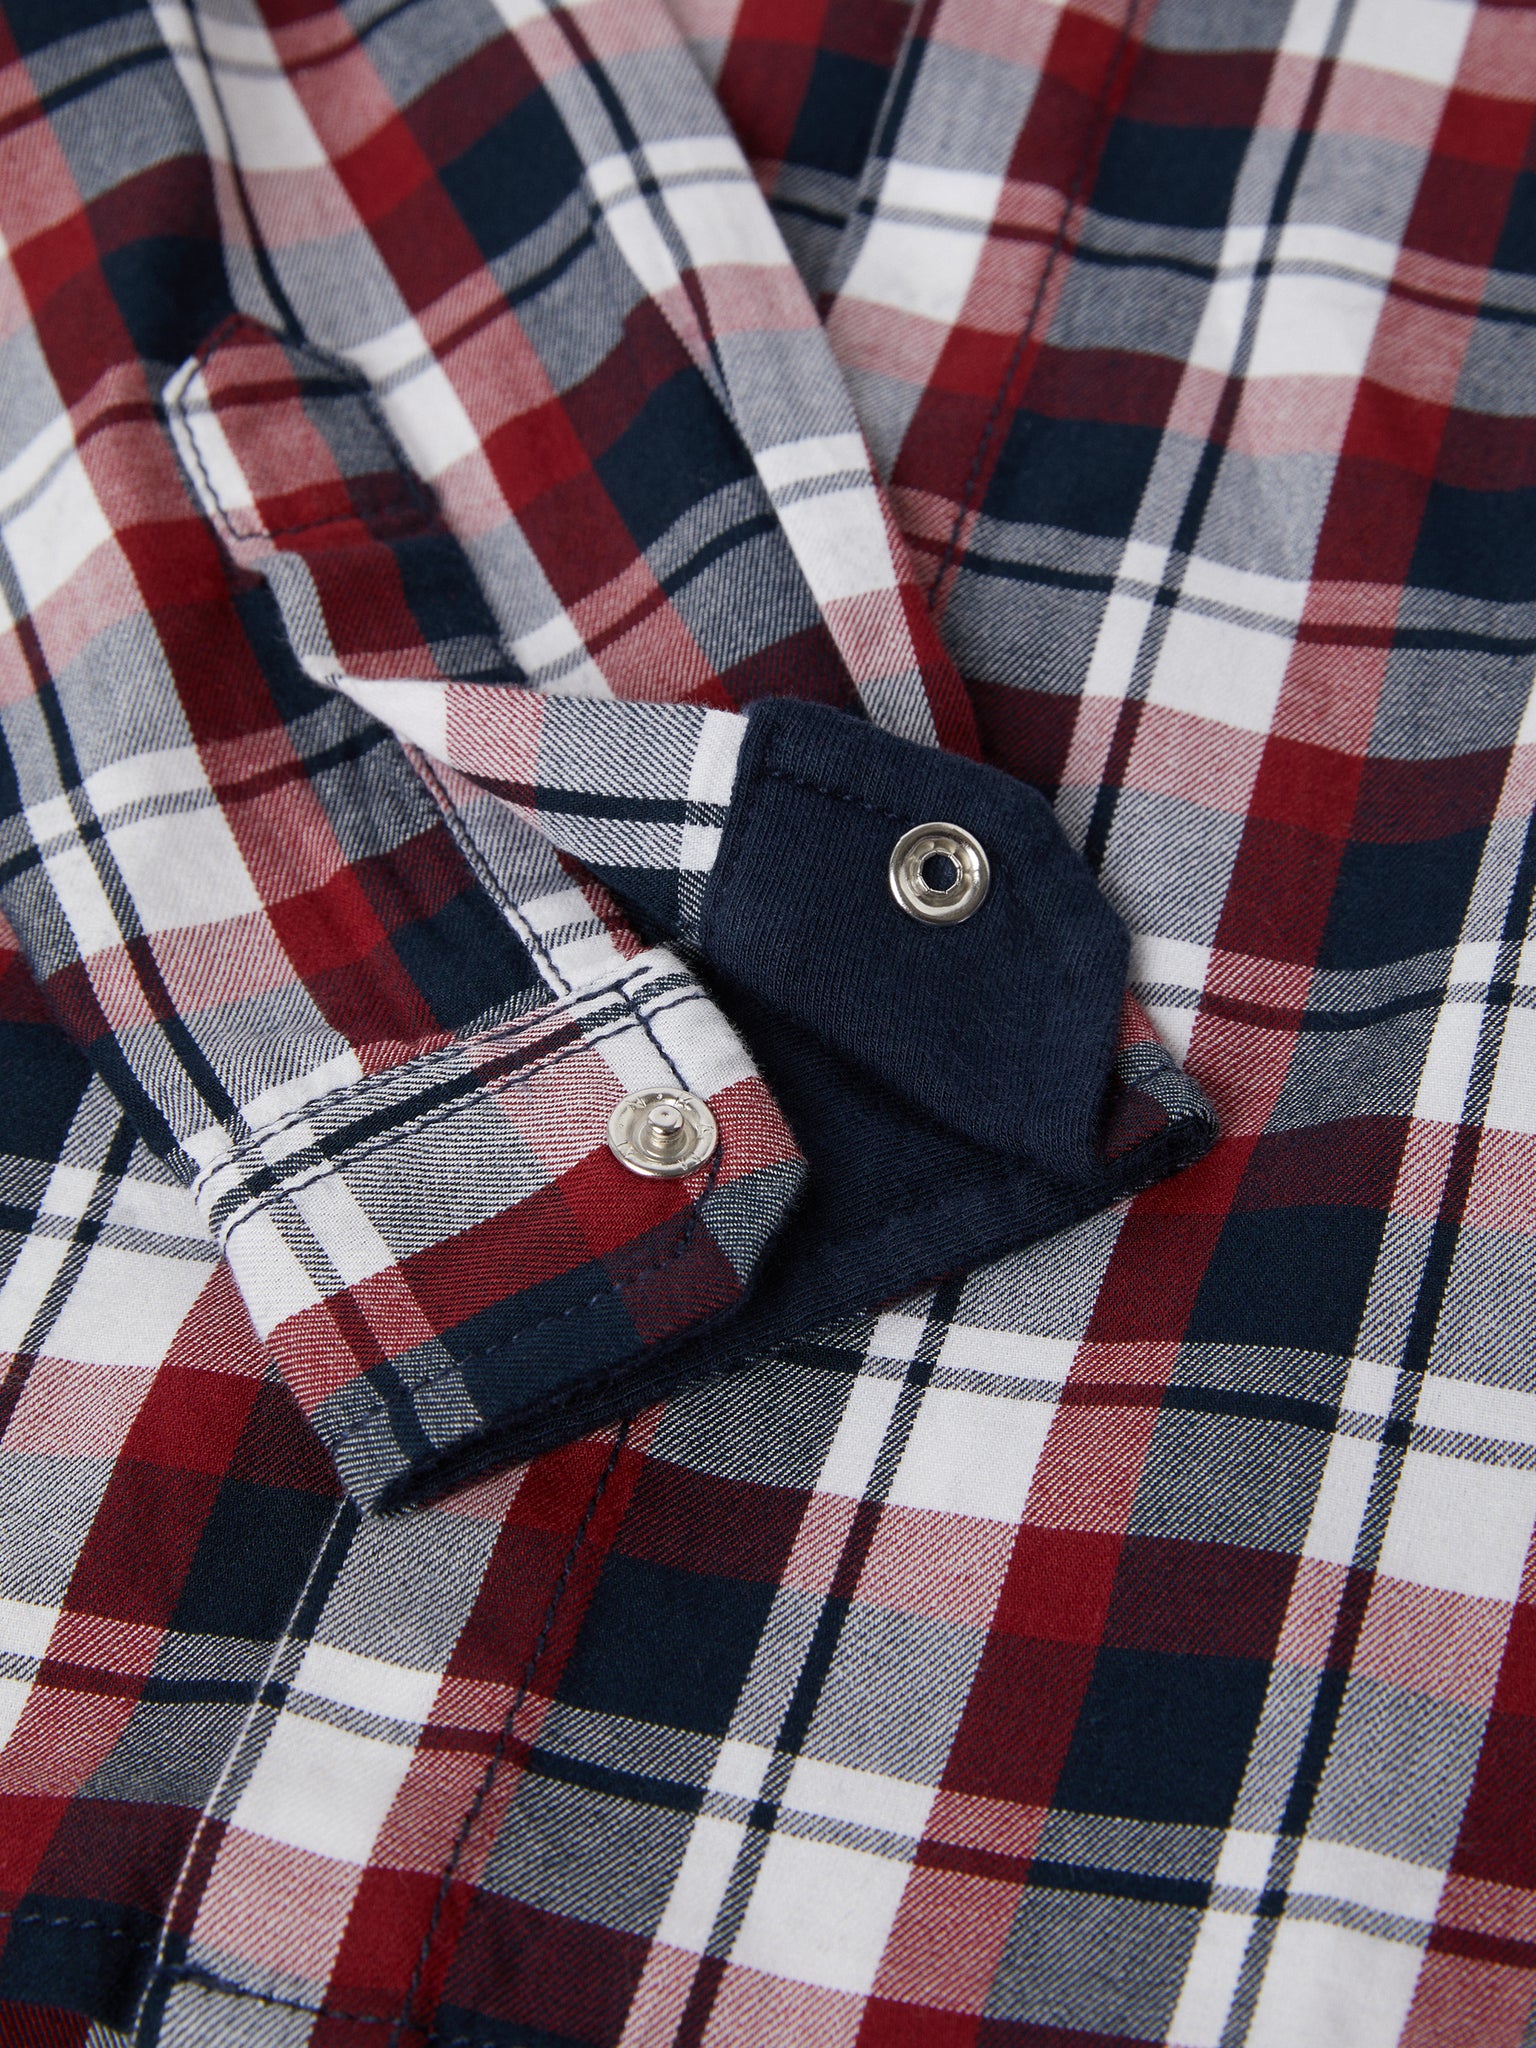 Checked Organic Cotton Baby Shirt from the Polarn O. Pyret baby collection. The best ethical baby clothes